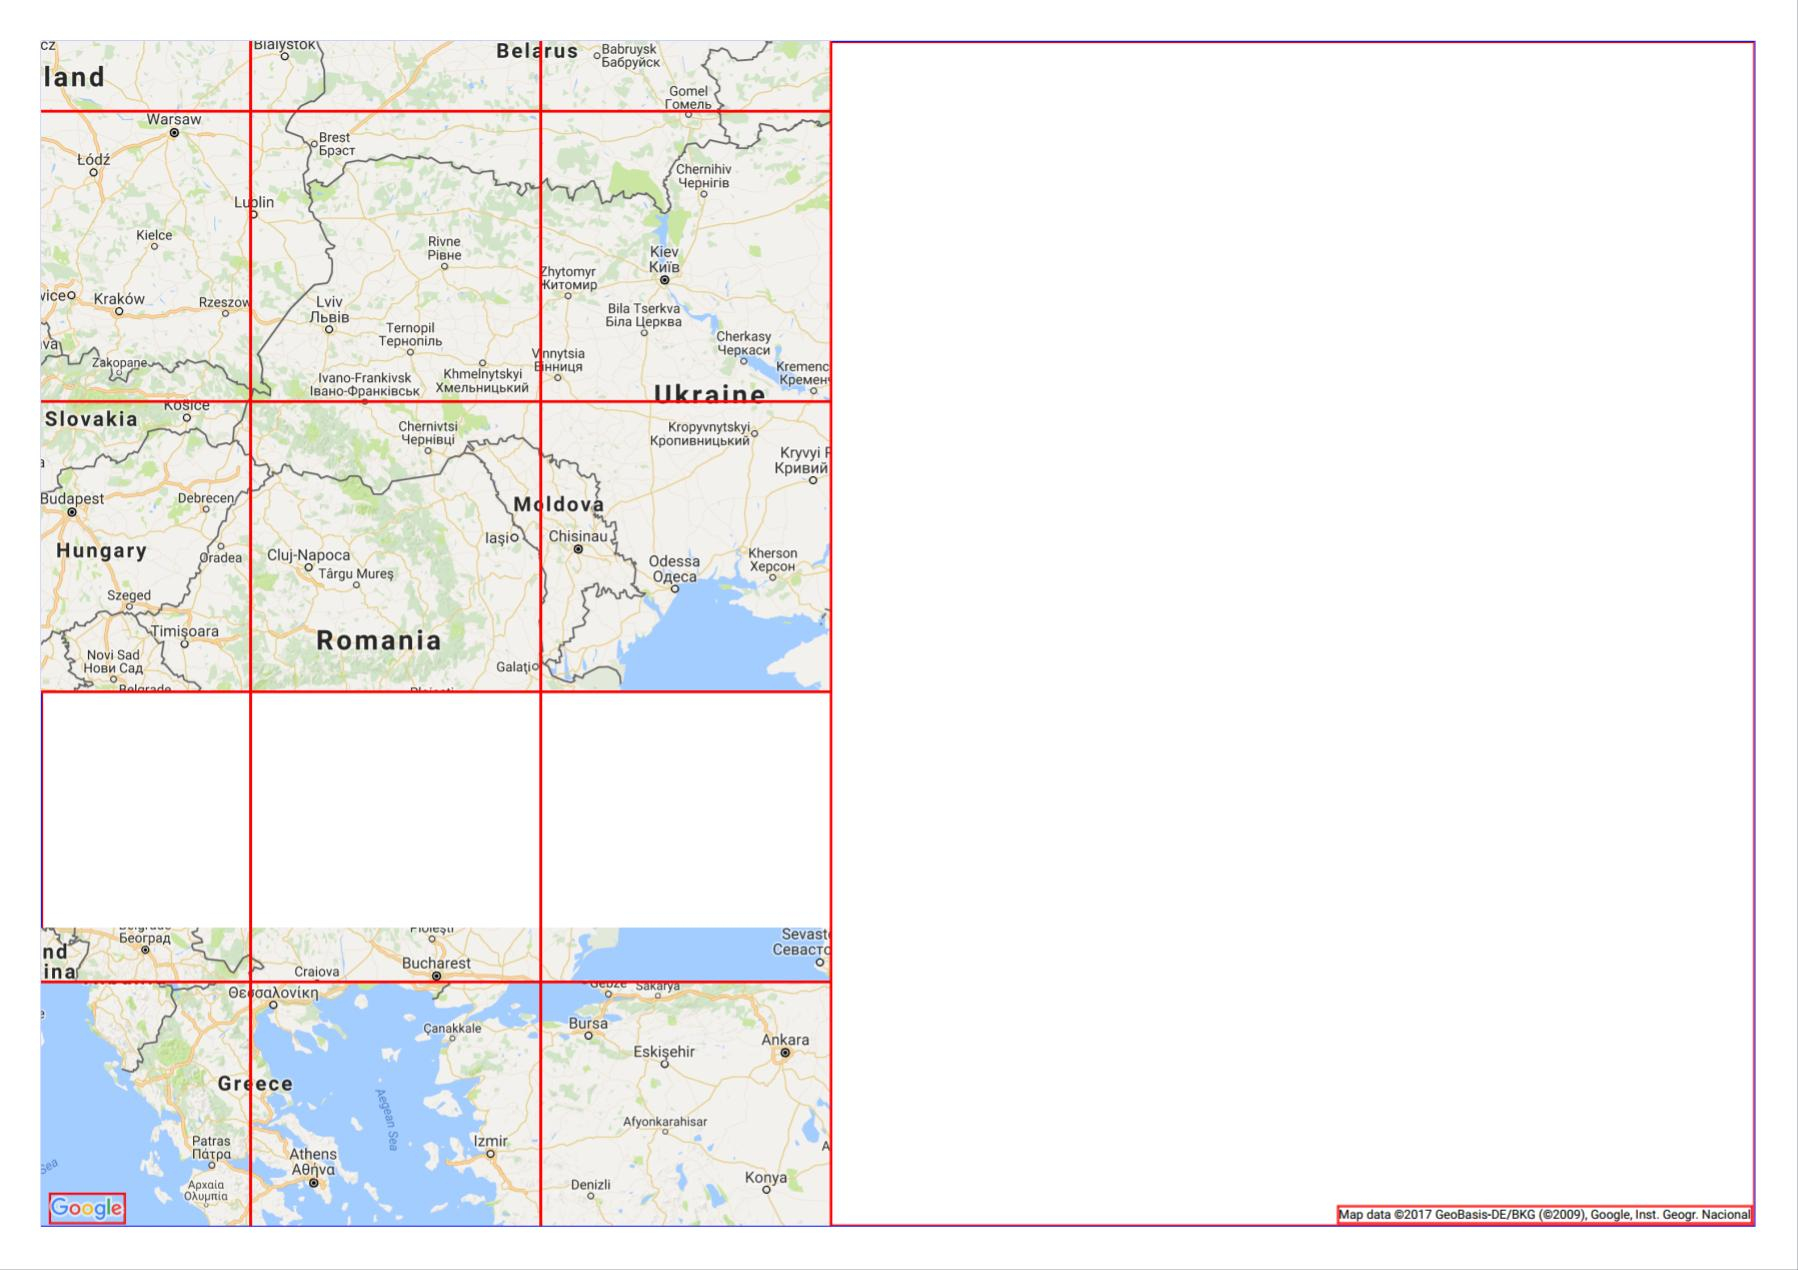 Google Maps Api Printing - Tiles Partially Missing - Geographic - Printable Google Maps